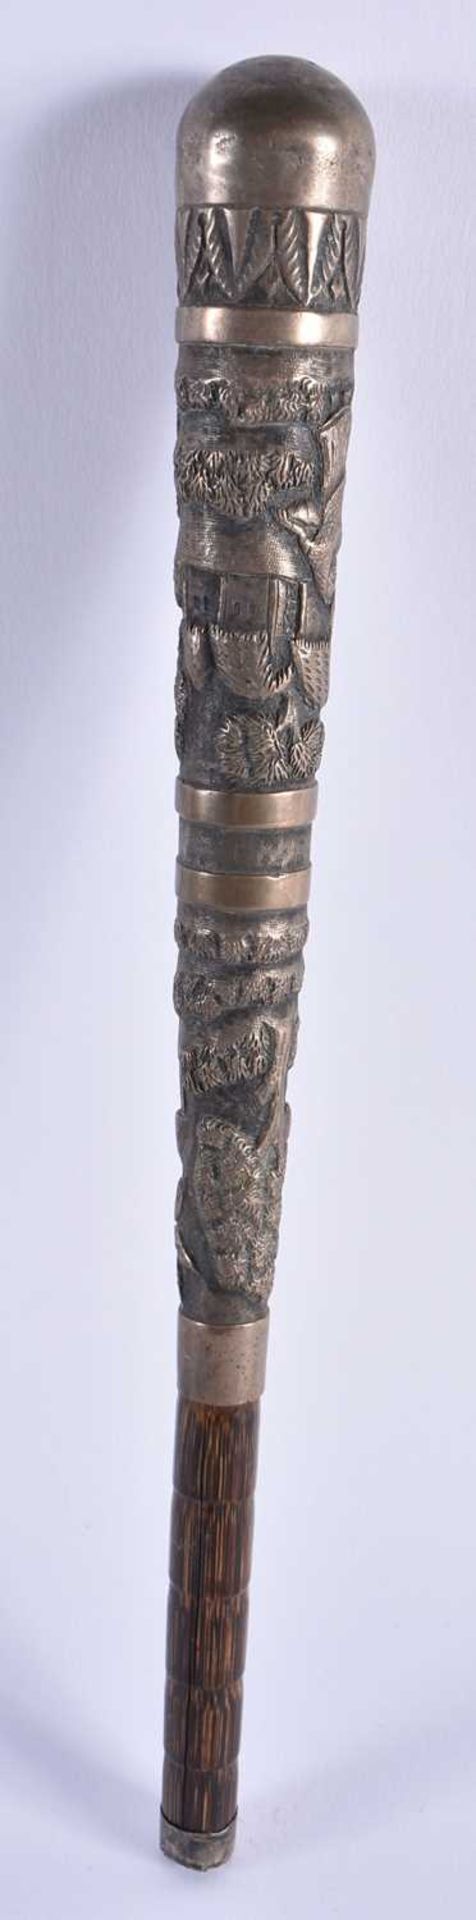 AN ANTIQUE INDIAN SILVER PARASOL HANDLE.107 grams overall. 26.5 cm long.